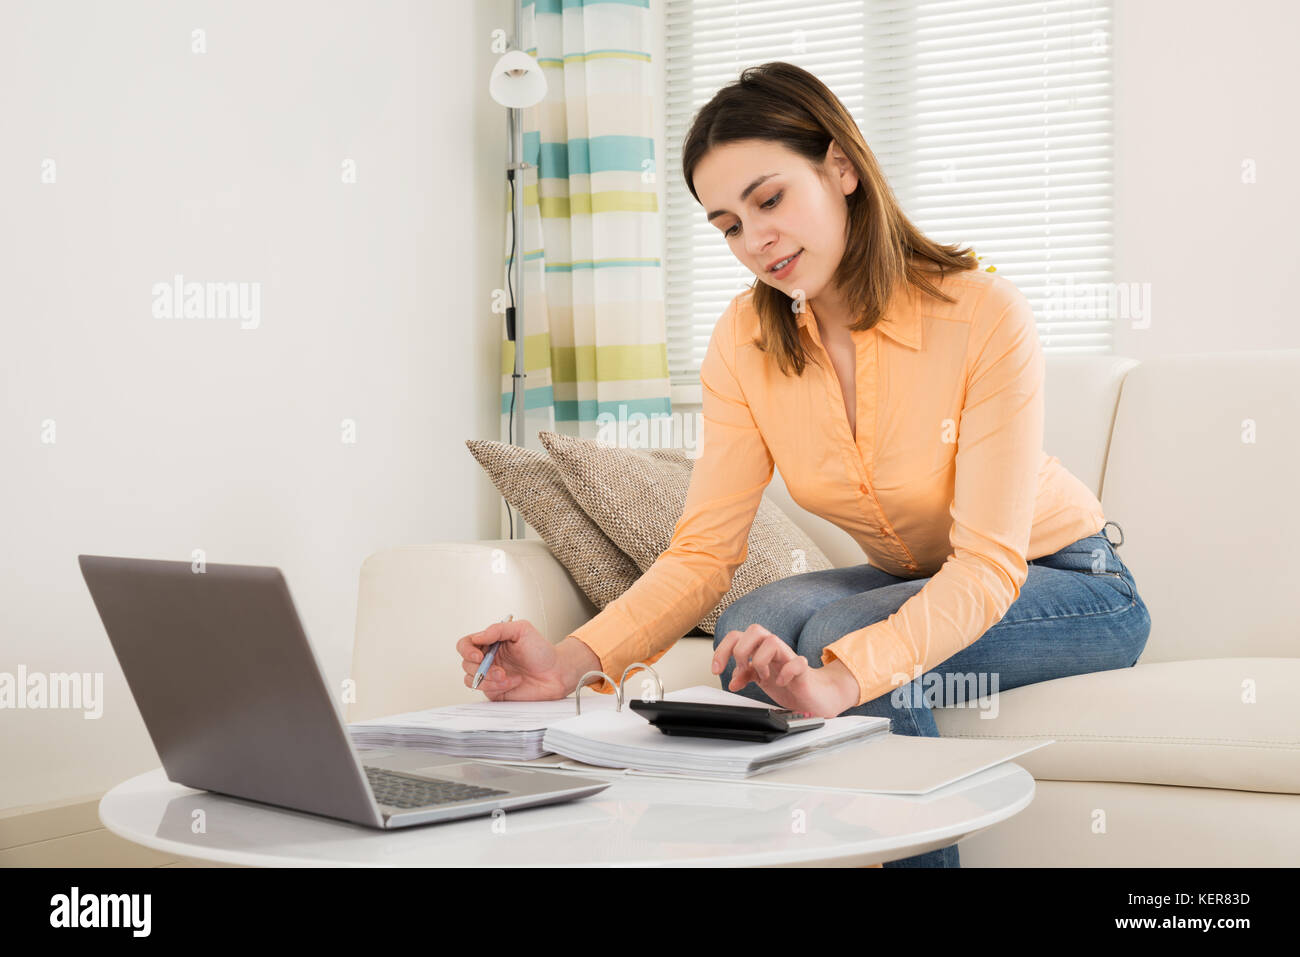 Young Woman Sitting On Sofa Calculating Bills In Her Room Stock Photo